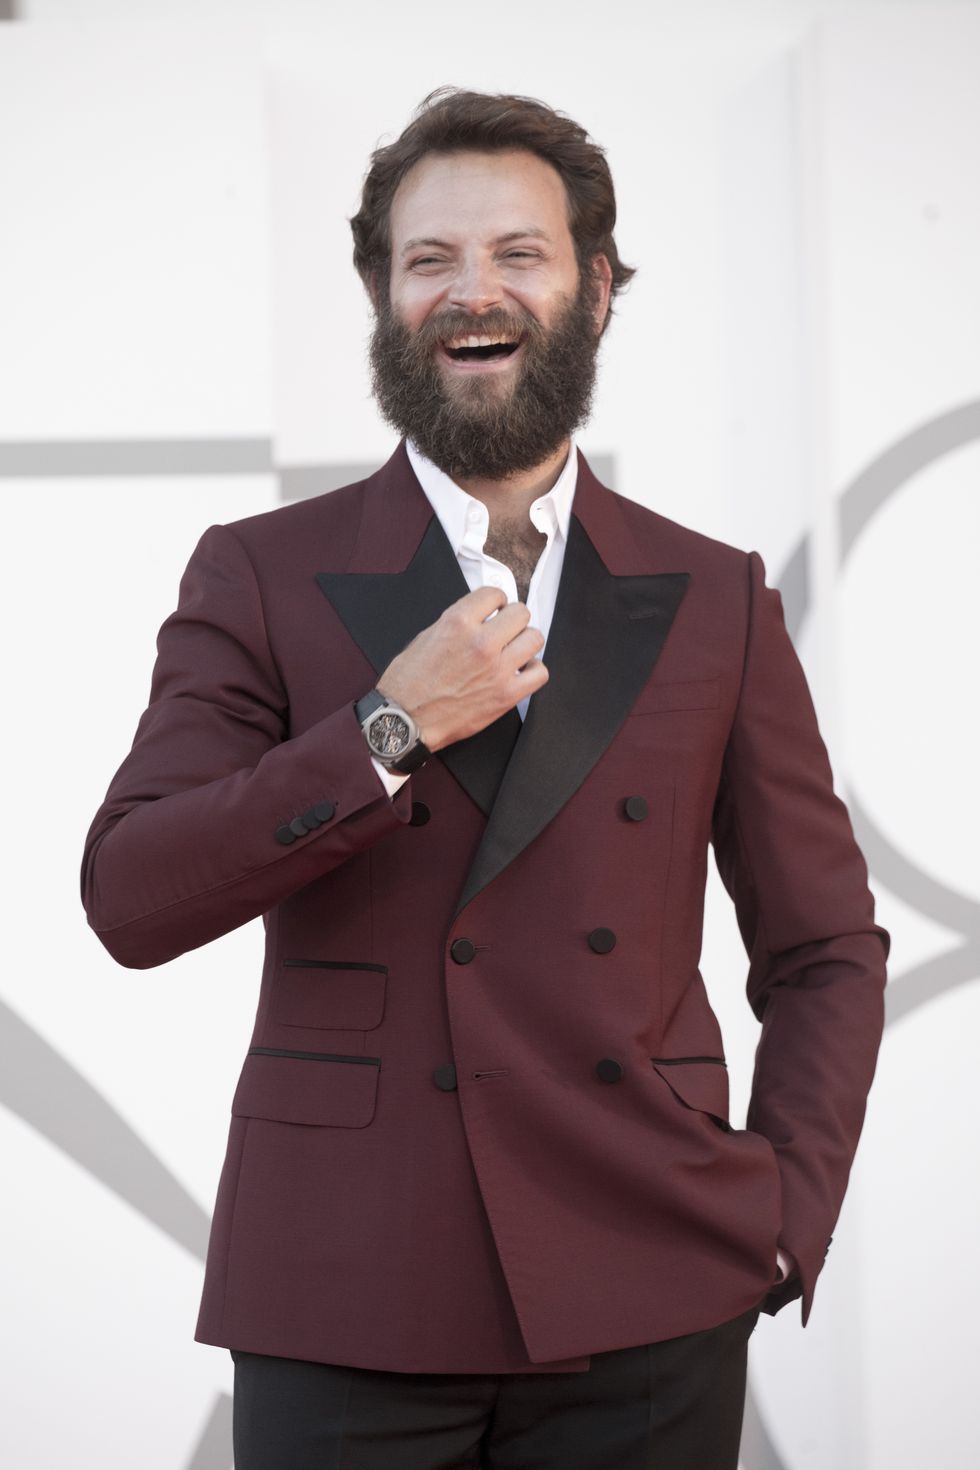 venice, italy   september 02 alessandro borghi attends the red carpet of the movie the hand of god during the 78th venice international film festival on september 02, 2021 in venice, italy photo by alessandra benedetti   corbiscorbis via getty images